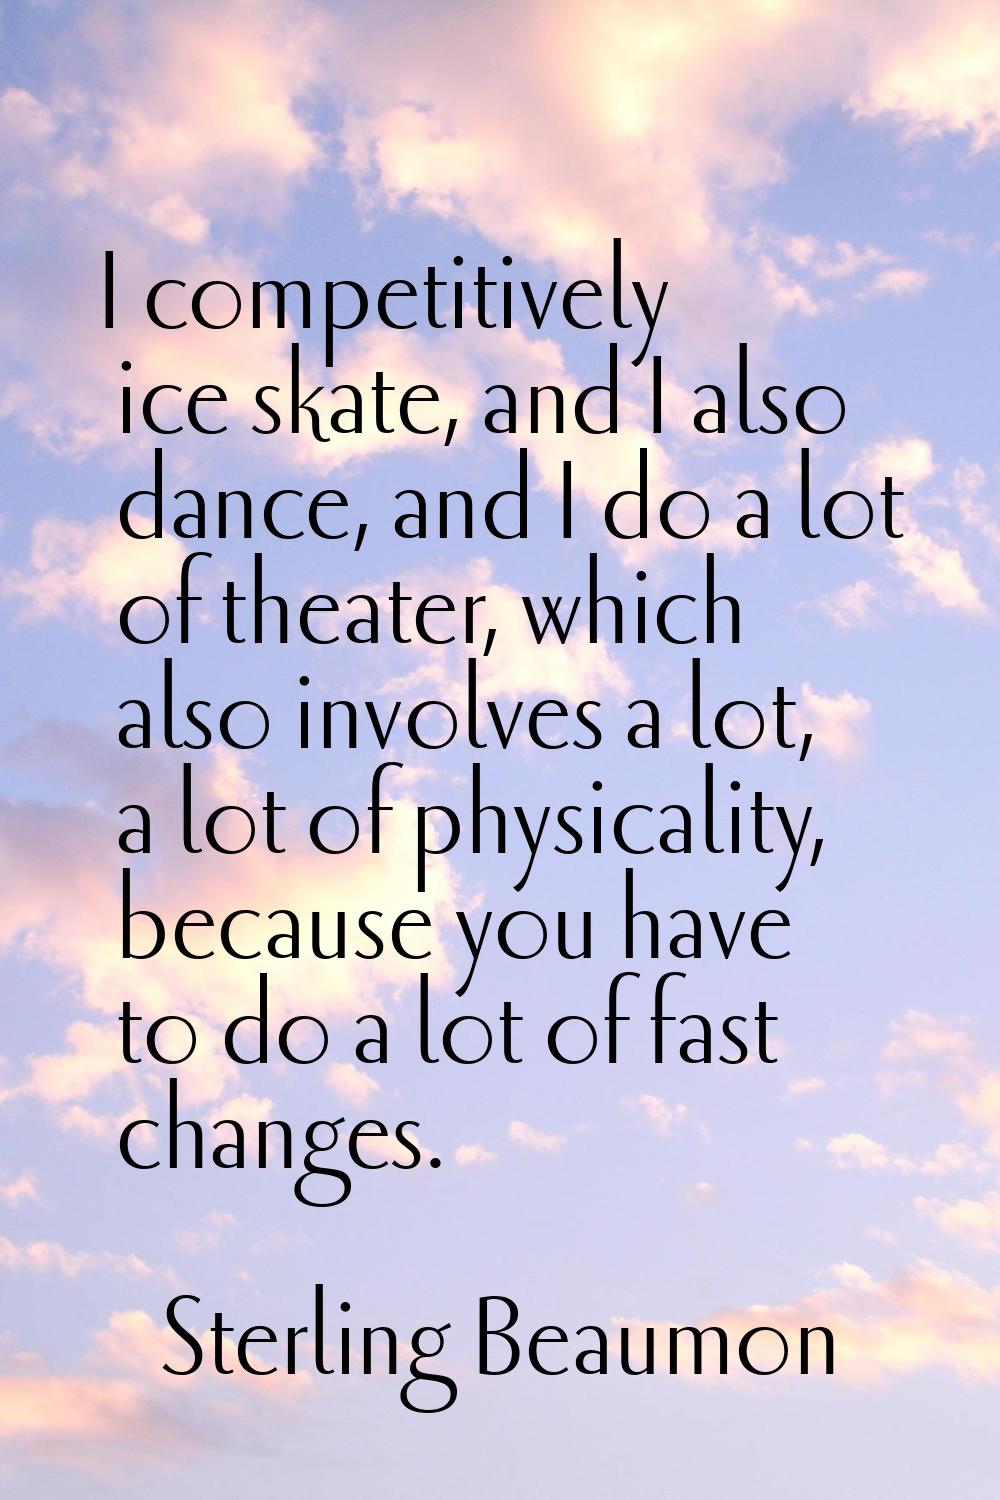 I competitively ice skate, and I also dance, and I do a lot of theater, which also involves a lot, 